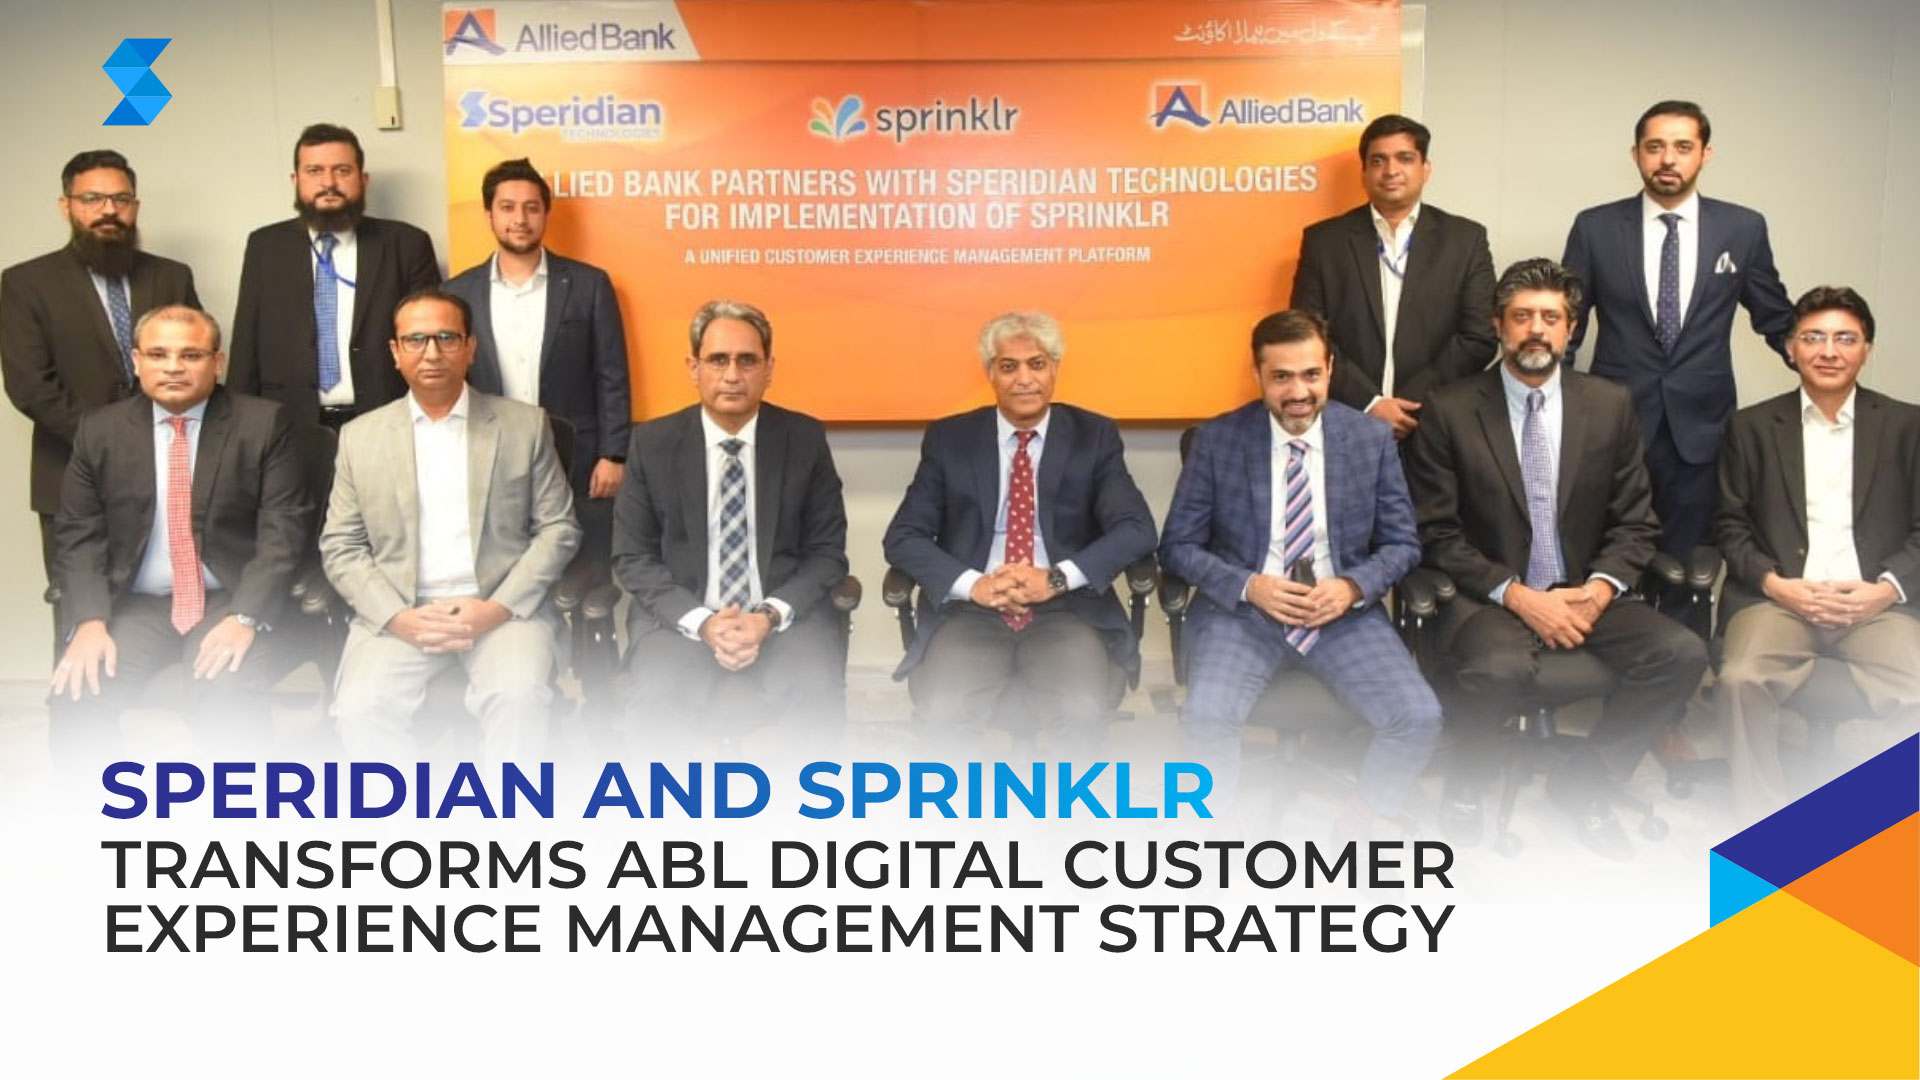 SPERIDIAN AND SPRINKLR TRANSFORMS ABL DIGITAL CUSTOMER EXPERIENCE MANAGEMENT STRATEGY